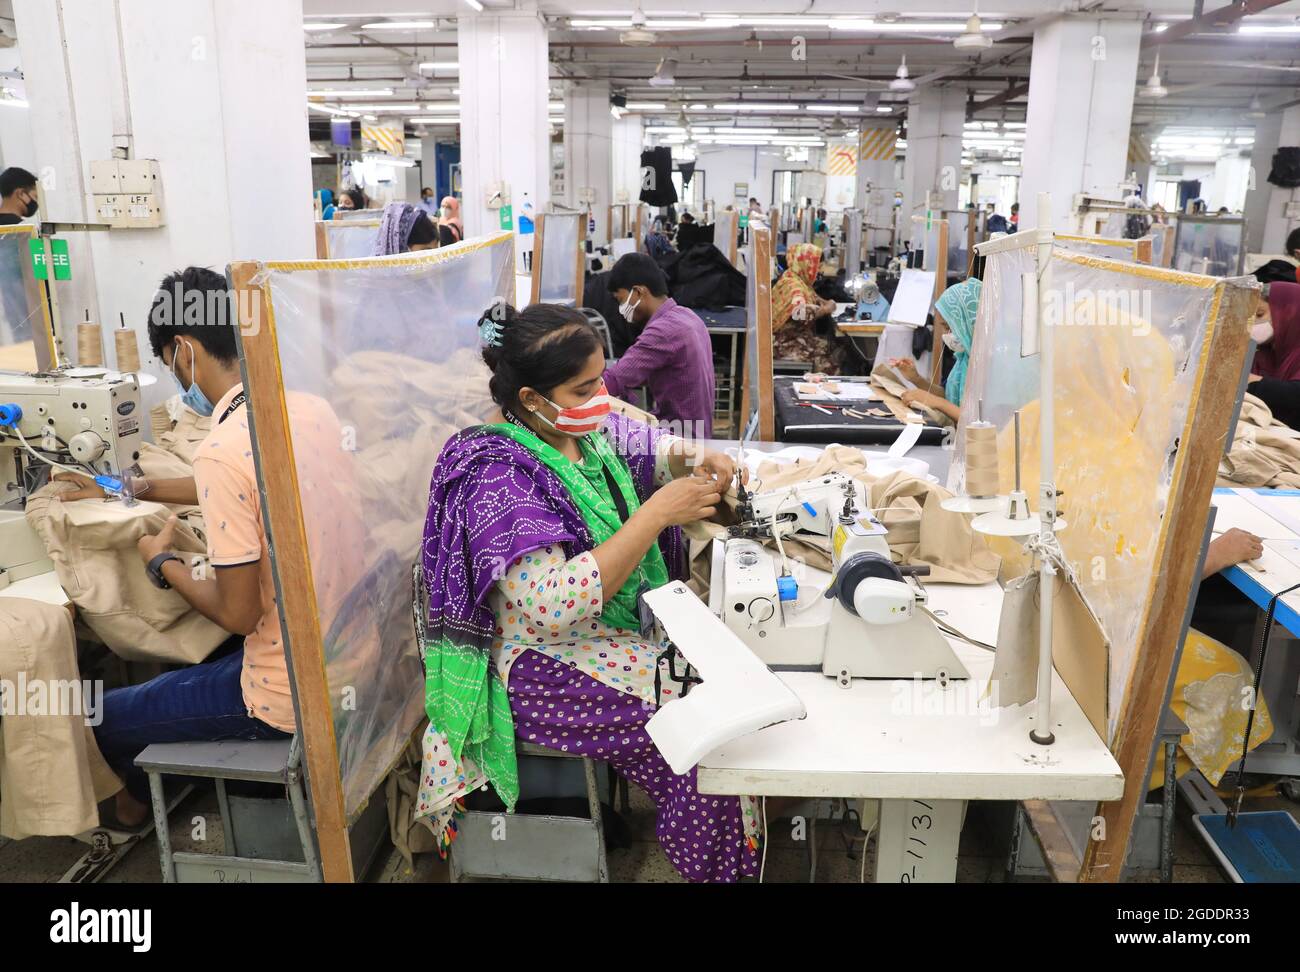 Dhaka, Bangladesh. August 12 2021: A woman manufactures clothes in a textile factory in the Gazipur industrial zone on the outskirts of Dhaka. Despite the lockdown measures, imposed across the country by the coronavirus, Bangladeshi textile factories have resumed production of clothing, which They supply the most important brands in the world and represent 84% of the country's total exports. Bangladesh is one of the largest textile exporters in the world employing more than 4 million people, most of them women. Credit: Pacific Press Media Production Corp./Alamy Live News Stock Photo